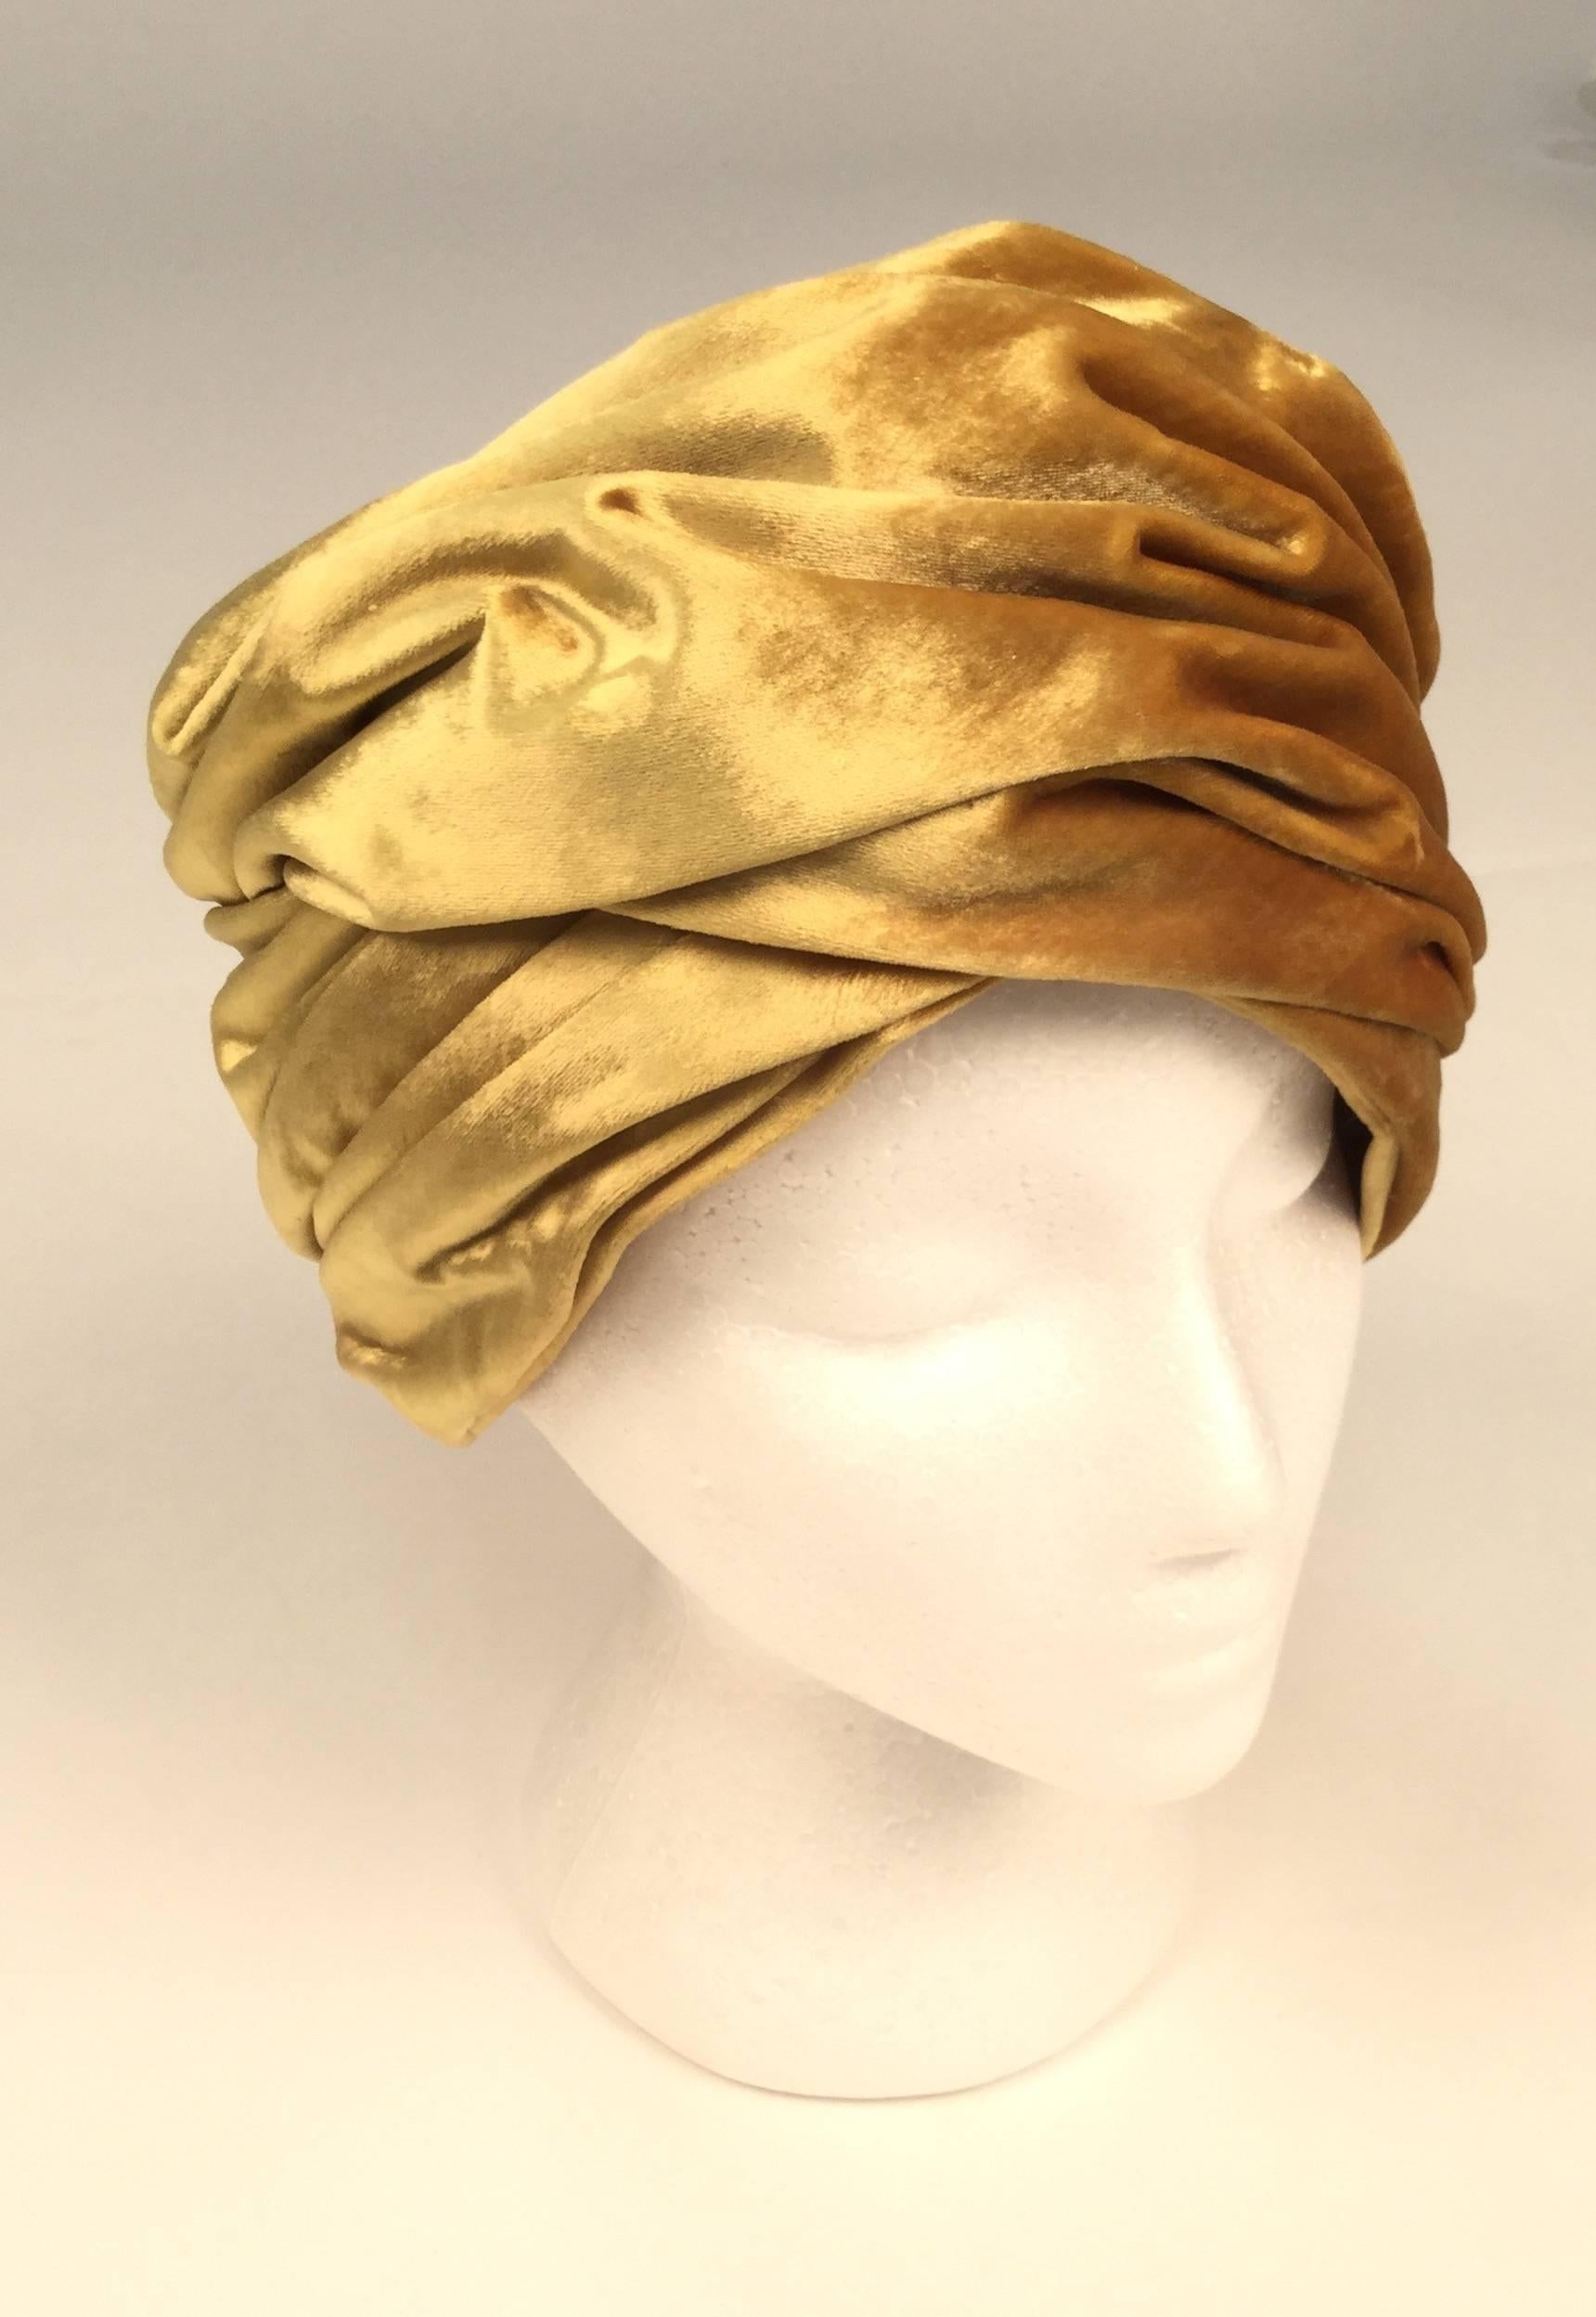 Fantastic 1960s Christian Dior gold velvet turban. 

Dress it up!  Dress it down!  Use it as a prop, art, or just covet this wonderful creation.

Excellent condition lined with gold silk grosgrain fabric.

Hat Measures 22